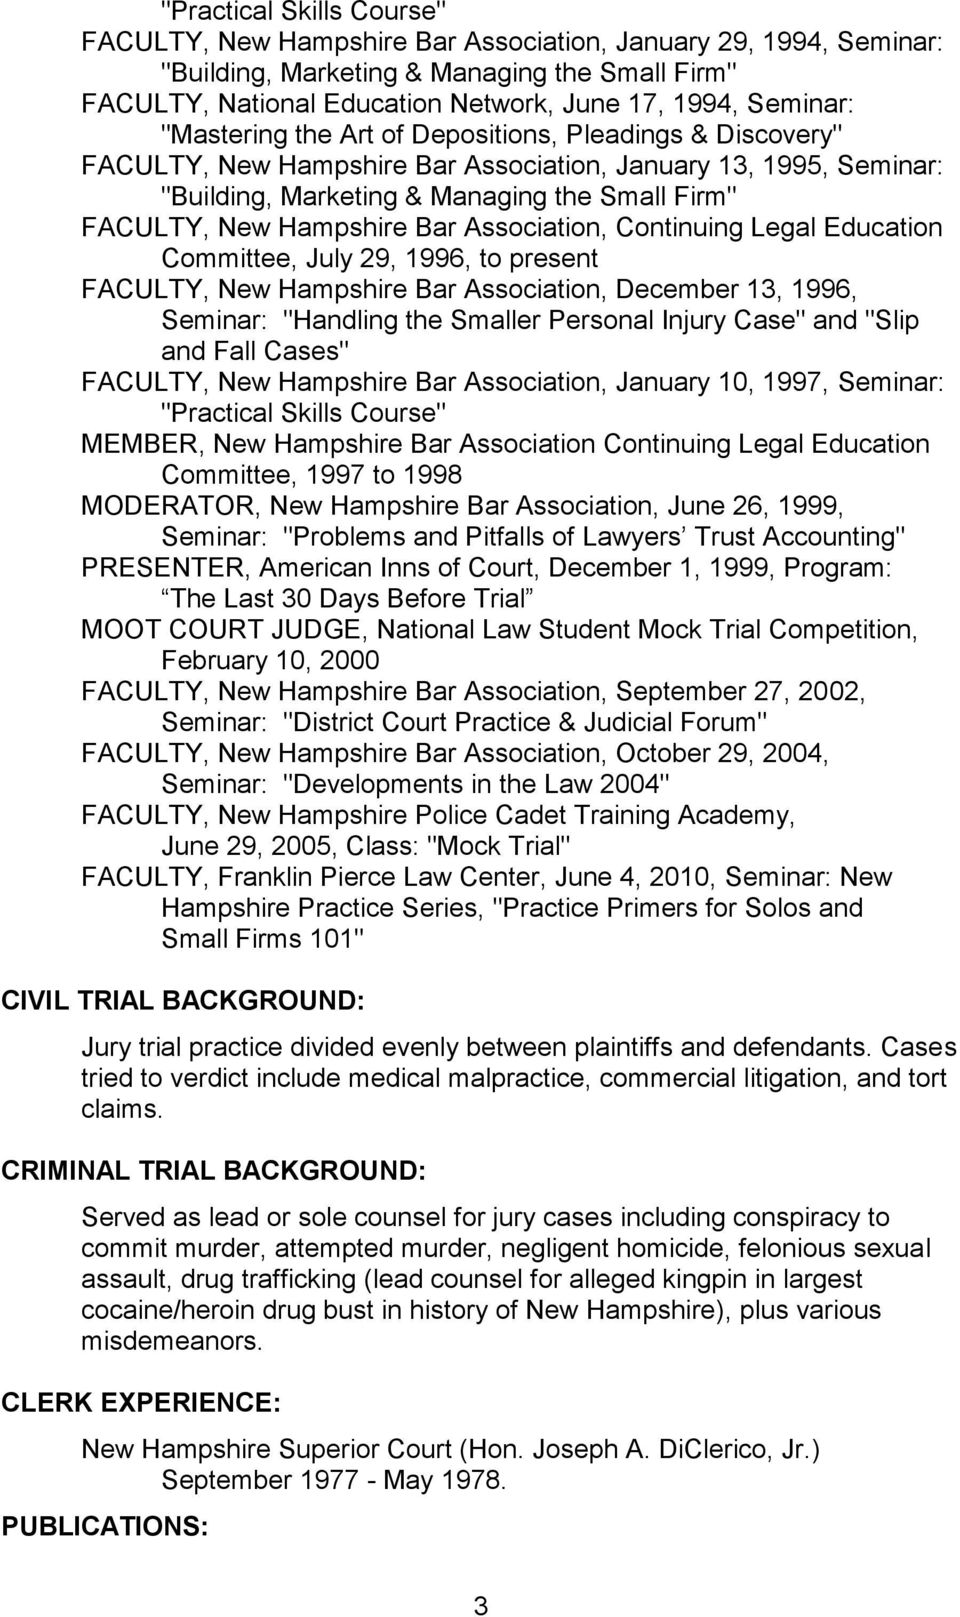 Continuing Legal Education Committee, July 29, 1996, to present FACULTY, New Hampshire Bar Association, December 13, 1996, Seminar: "Handling the Smaller Personal Injury Case" and "Slip and Fall